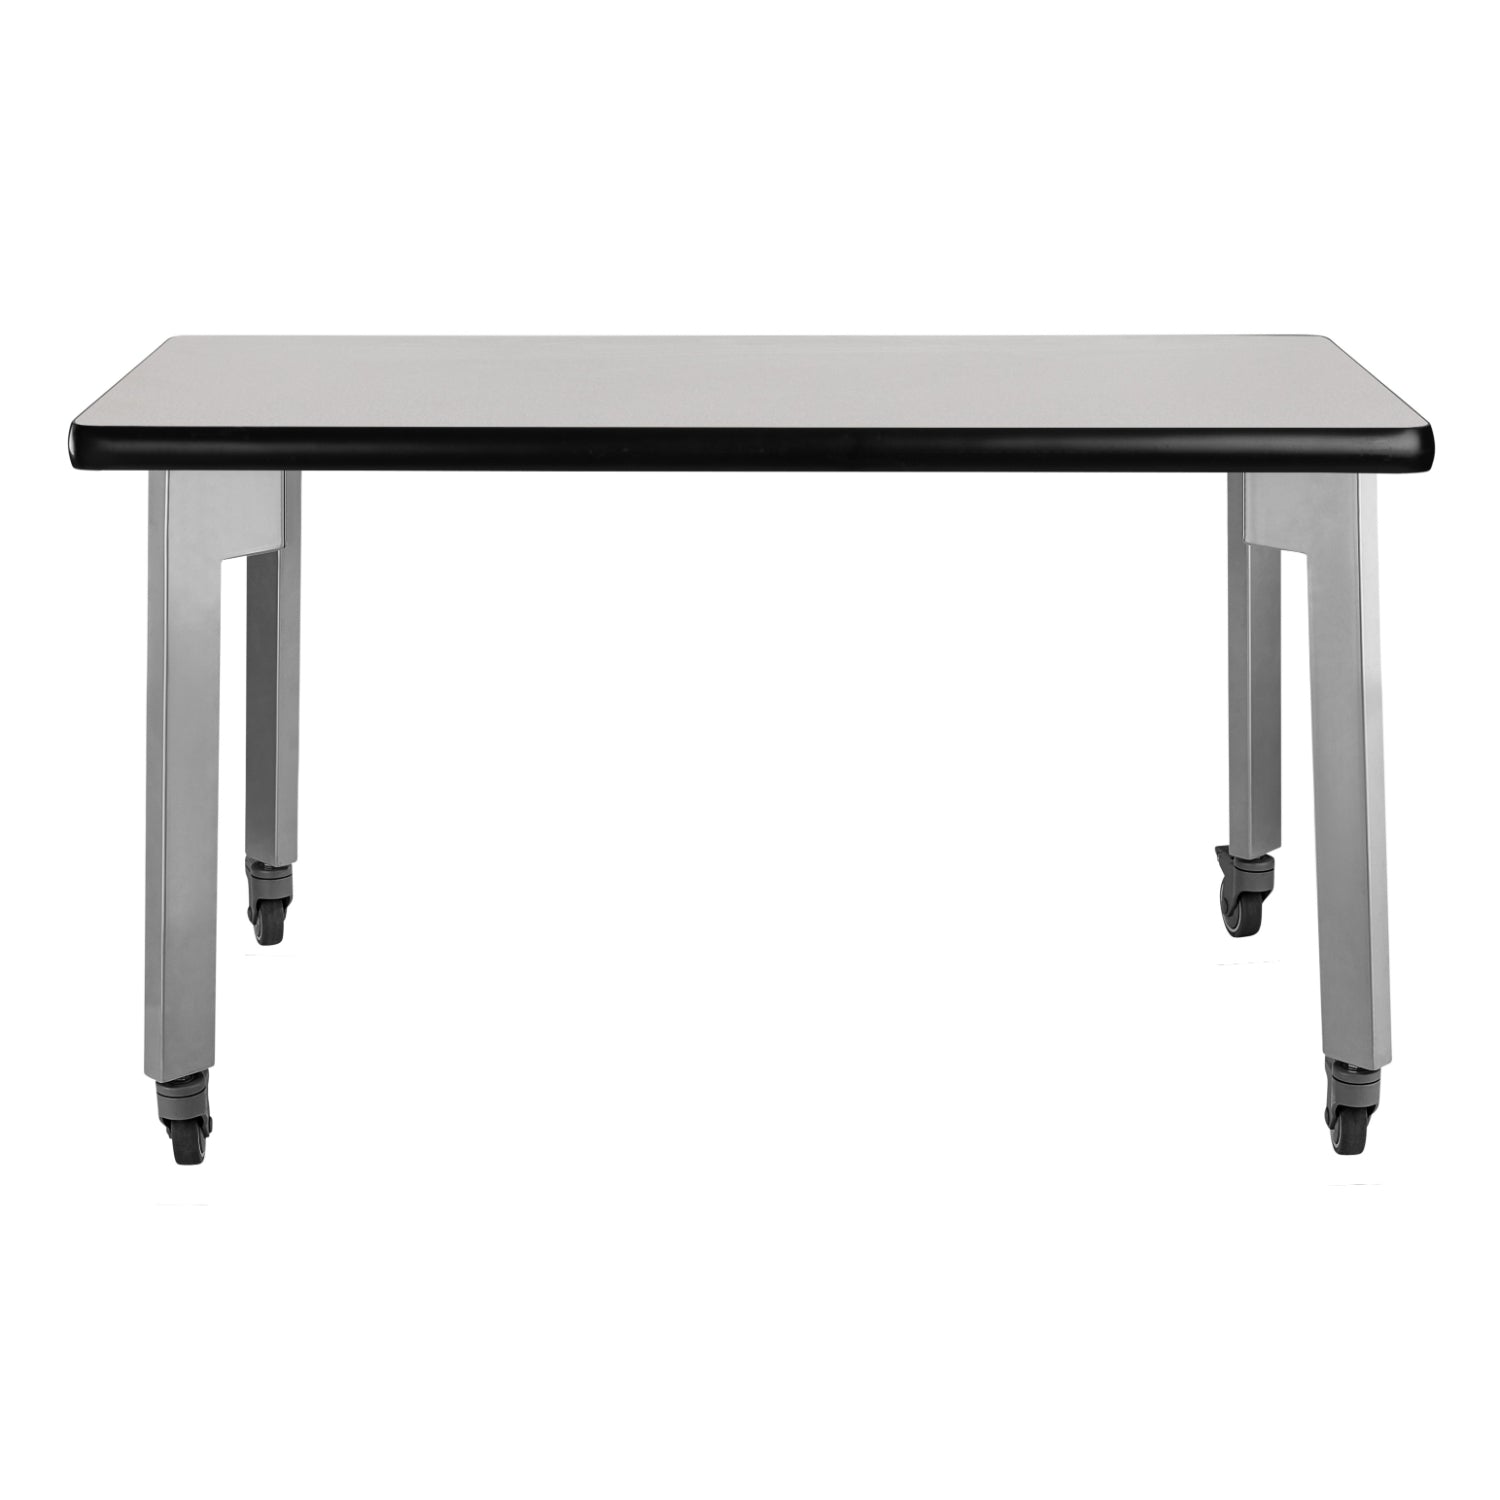 Titan Mobile Table, 24" x 54", Standard High Pressure Laminate Top with Particleboard Core and T-Mold Edge